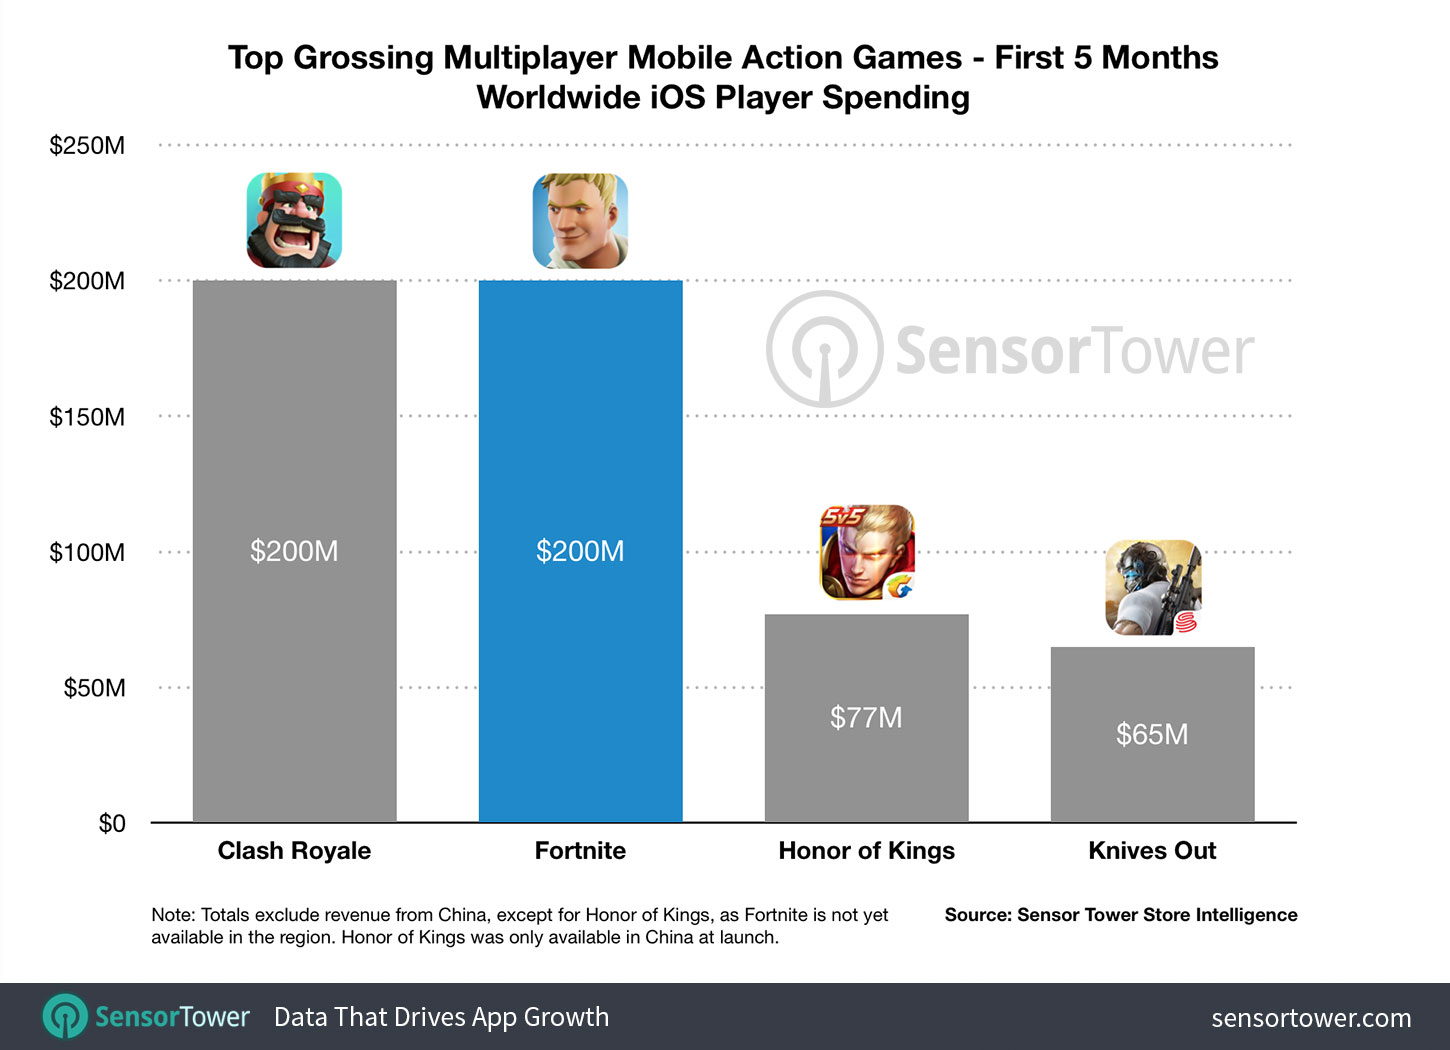 Chart showing Fortnite's gross revenue on iOS in its first five months compared to other top grossing mobile multiplayer games